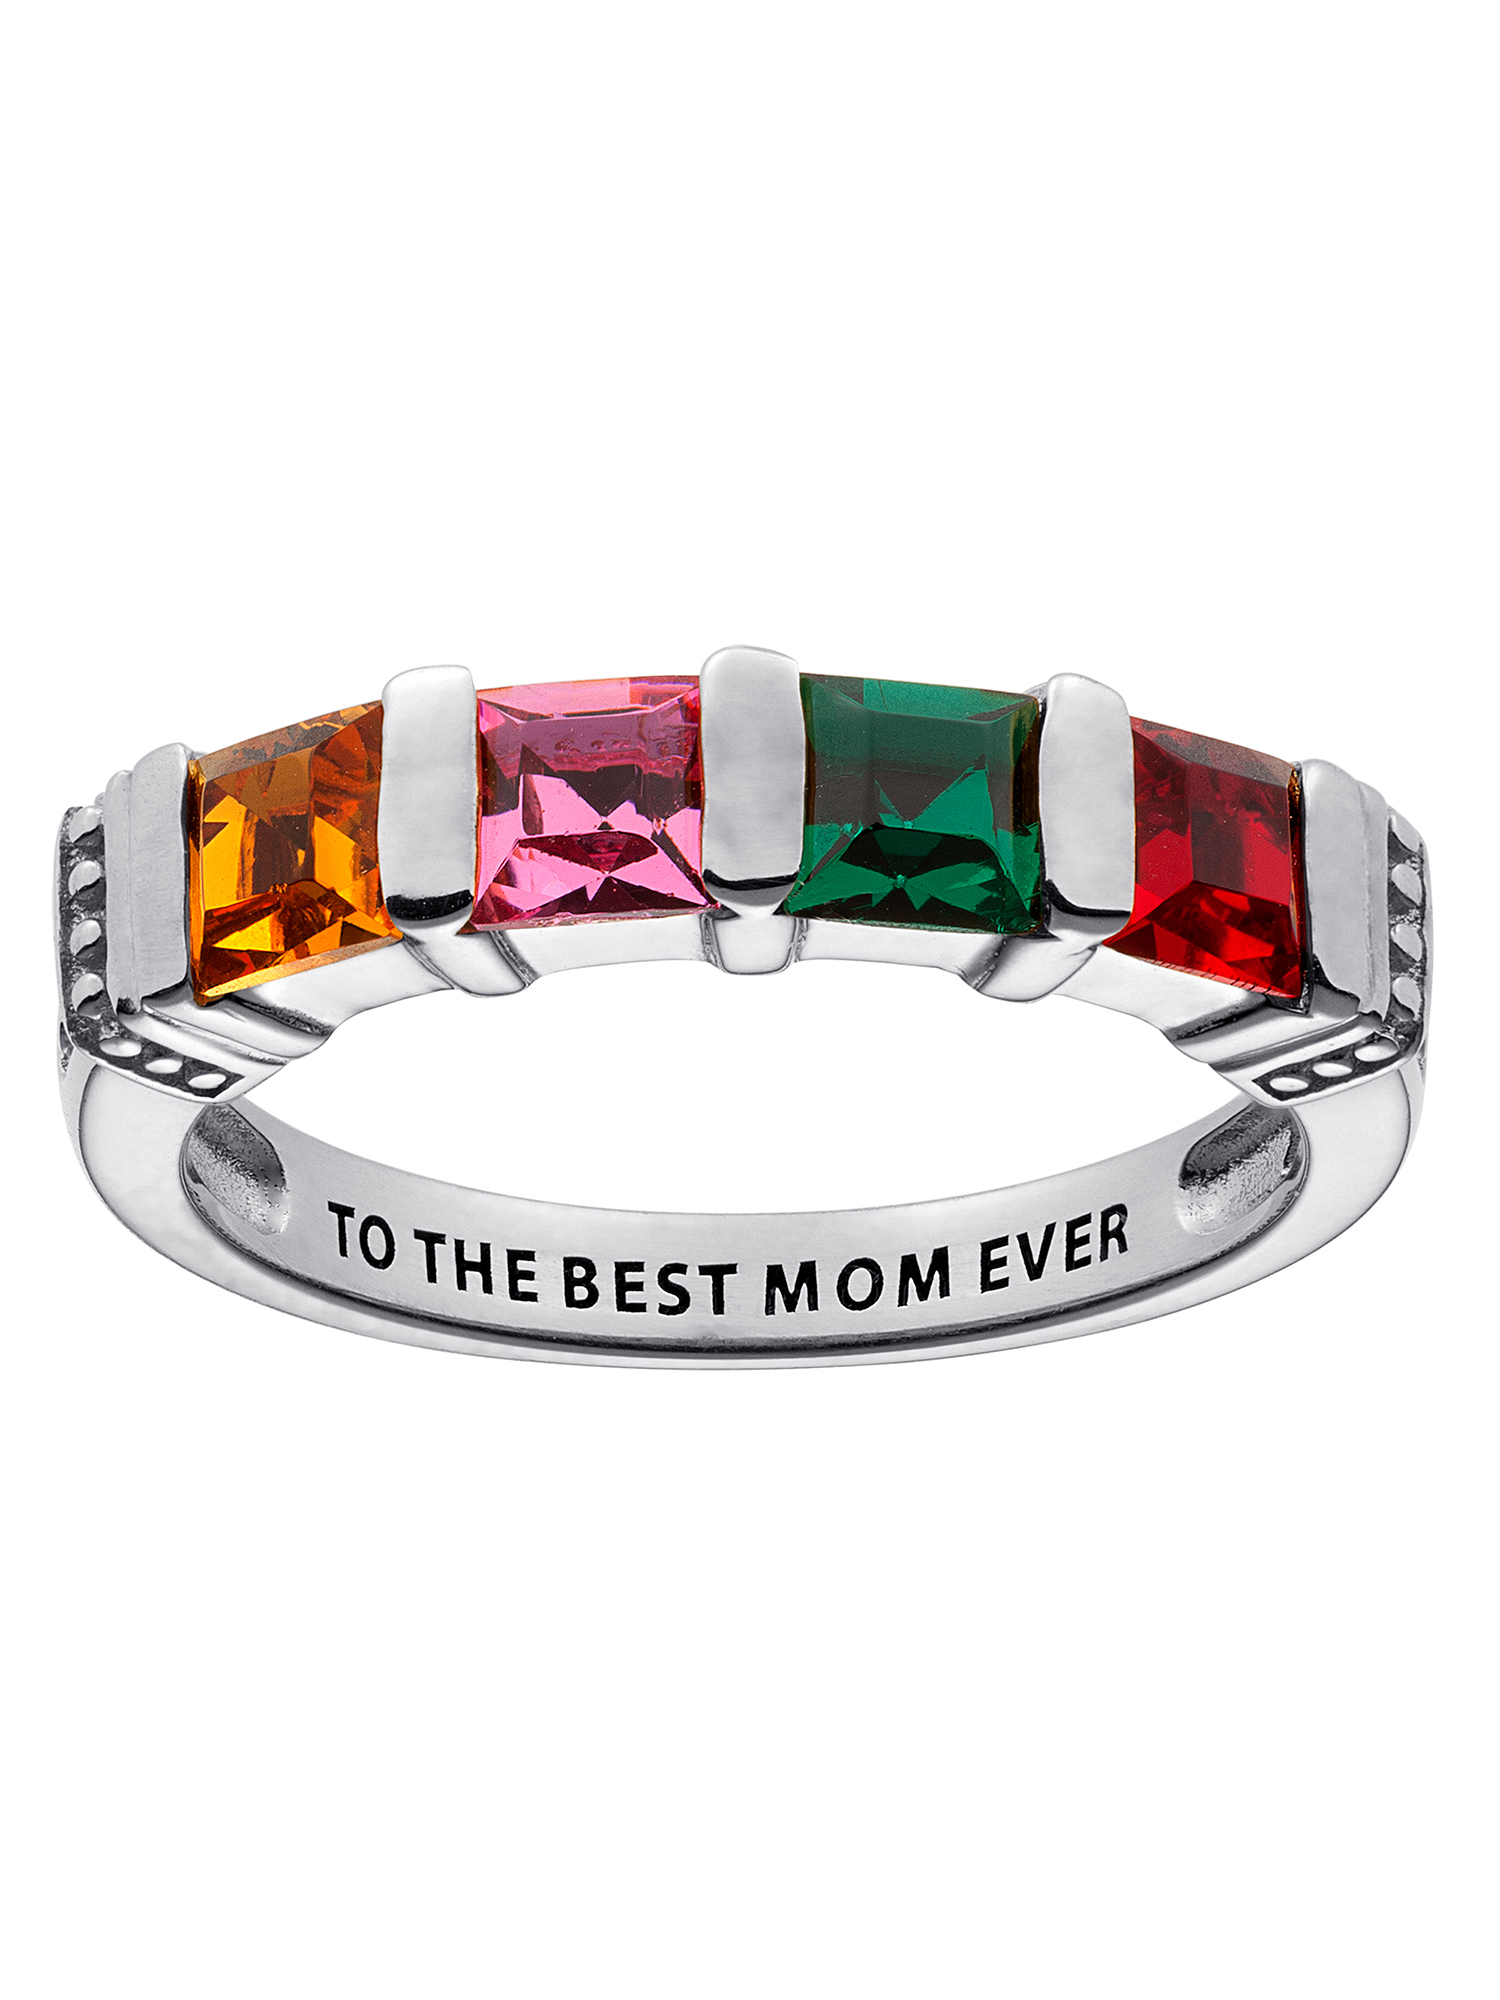 Family Jewelry Personalized Planet Mother's Sterling Silver Square Birthstone Ring 2-5 Stones ,Women's - image 1 of 3